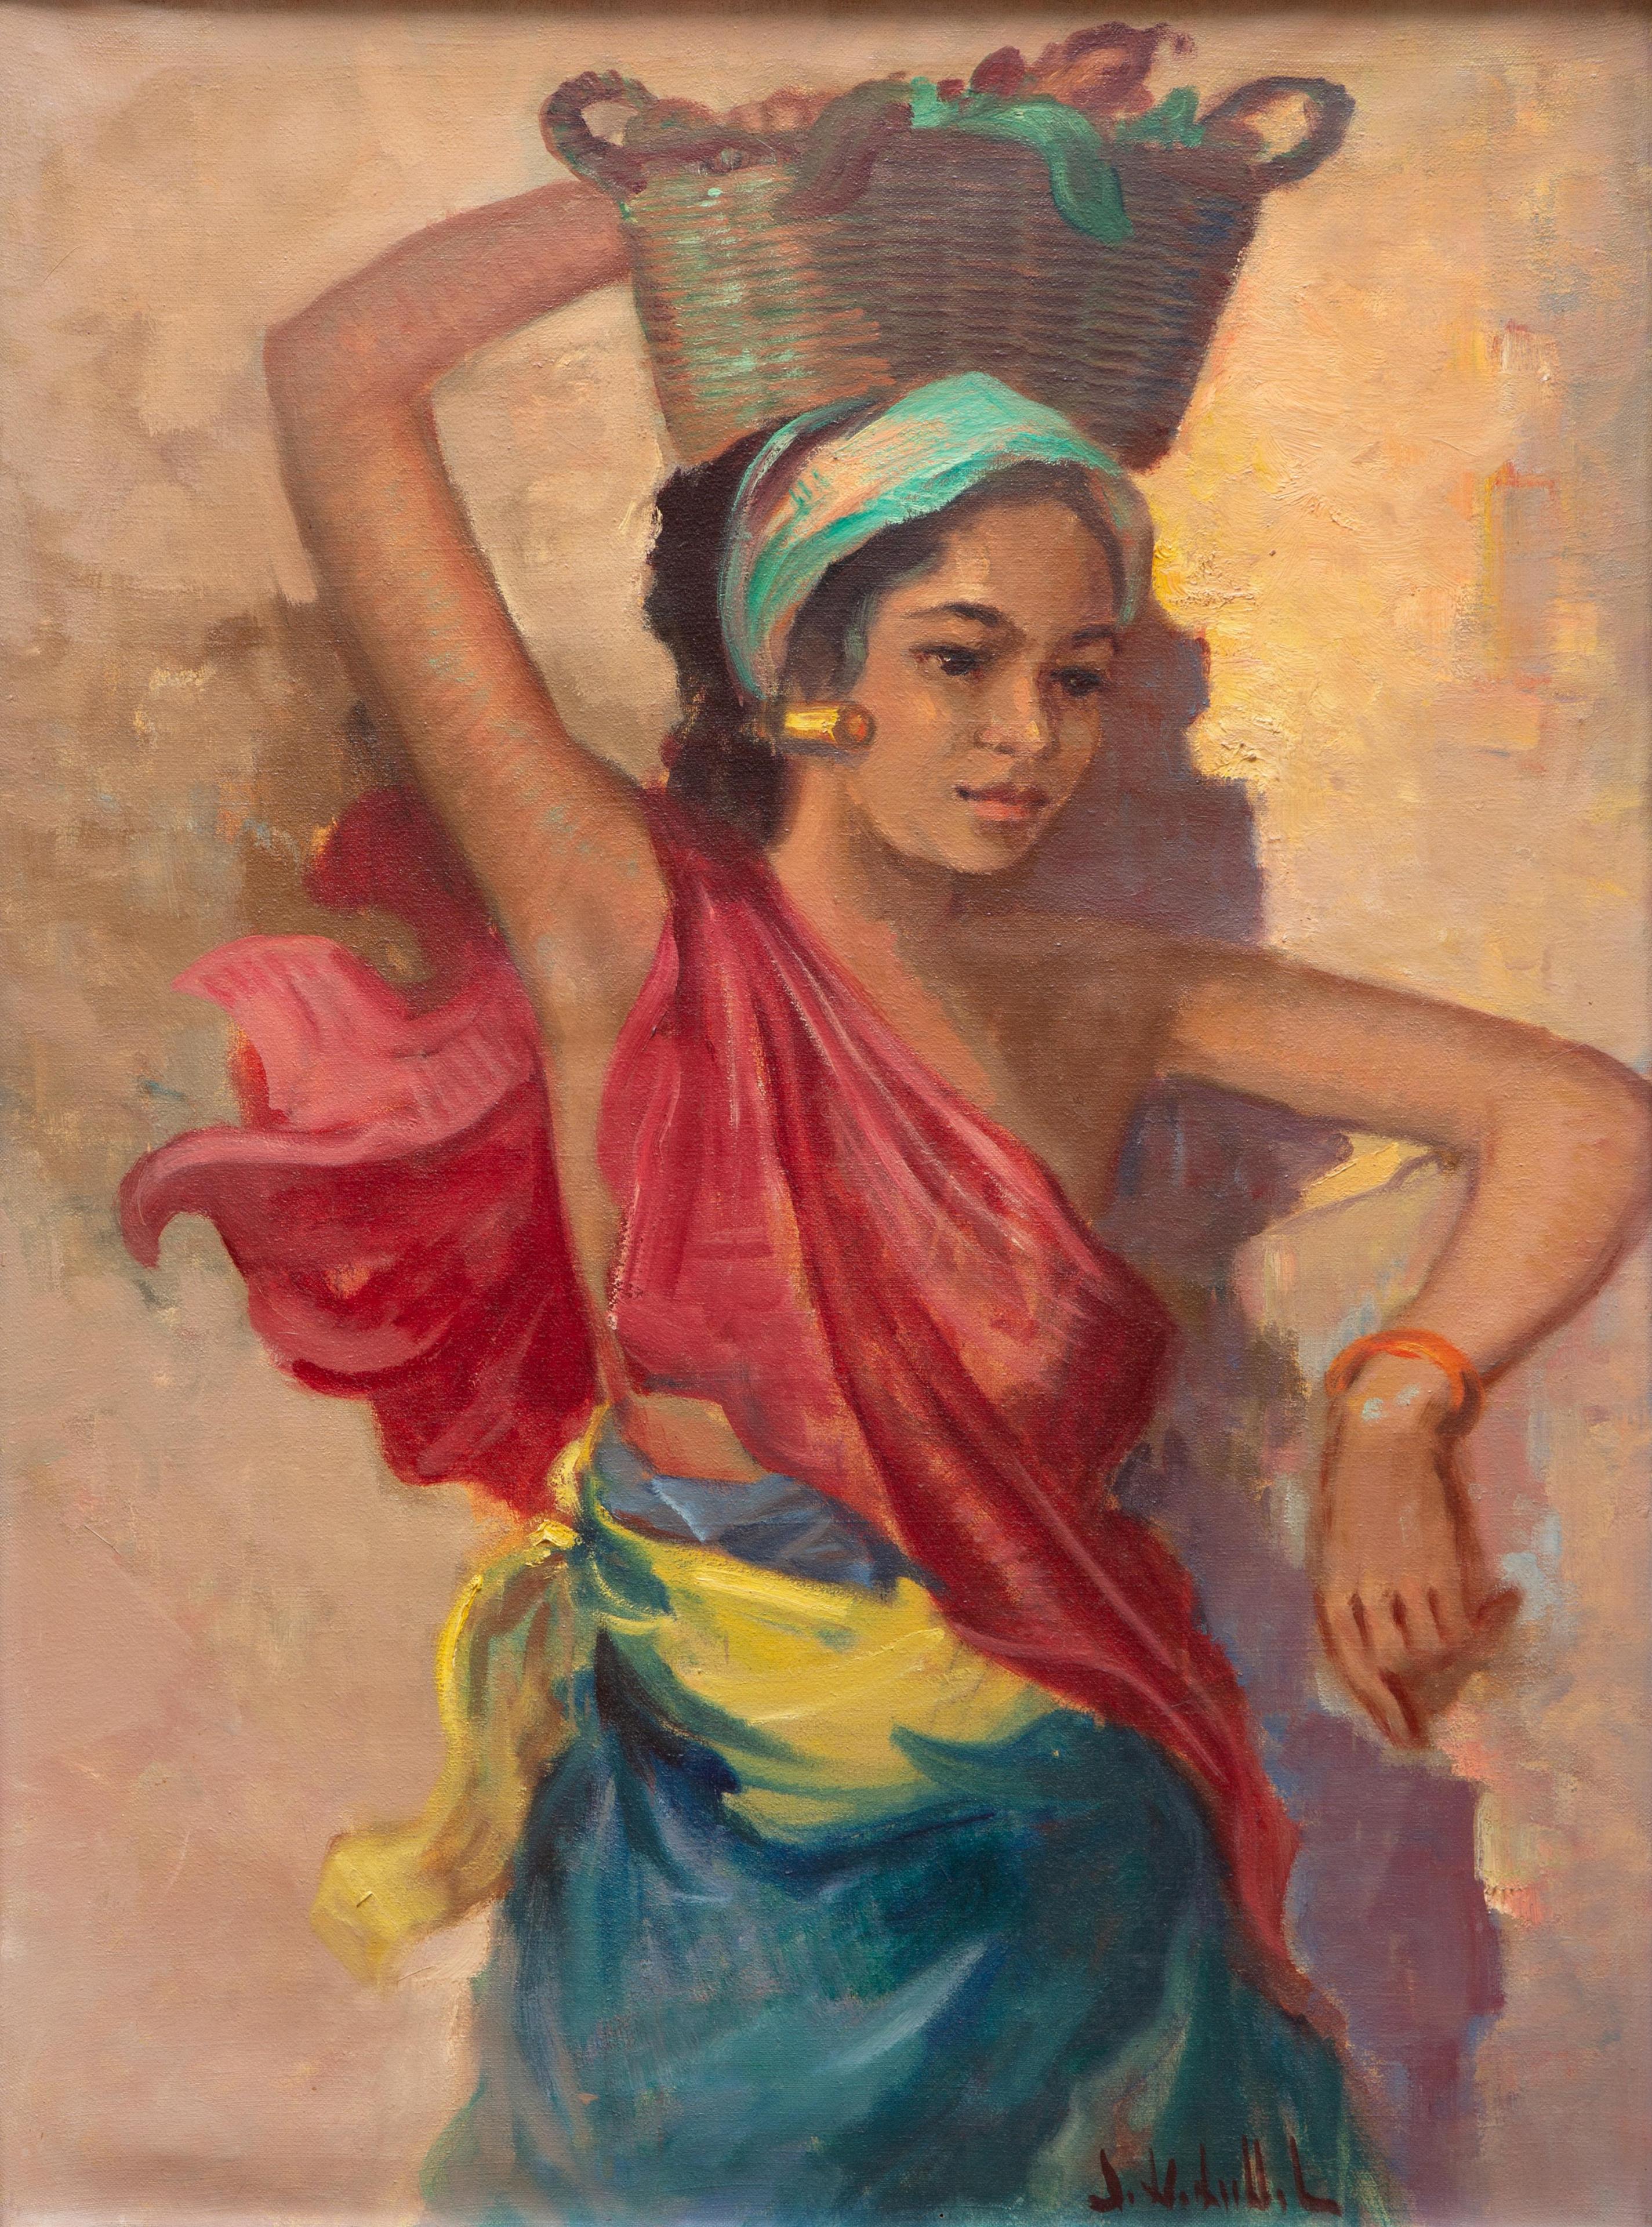 A Balinese girl carrying a basket on her head